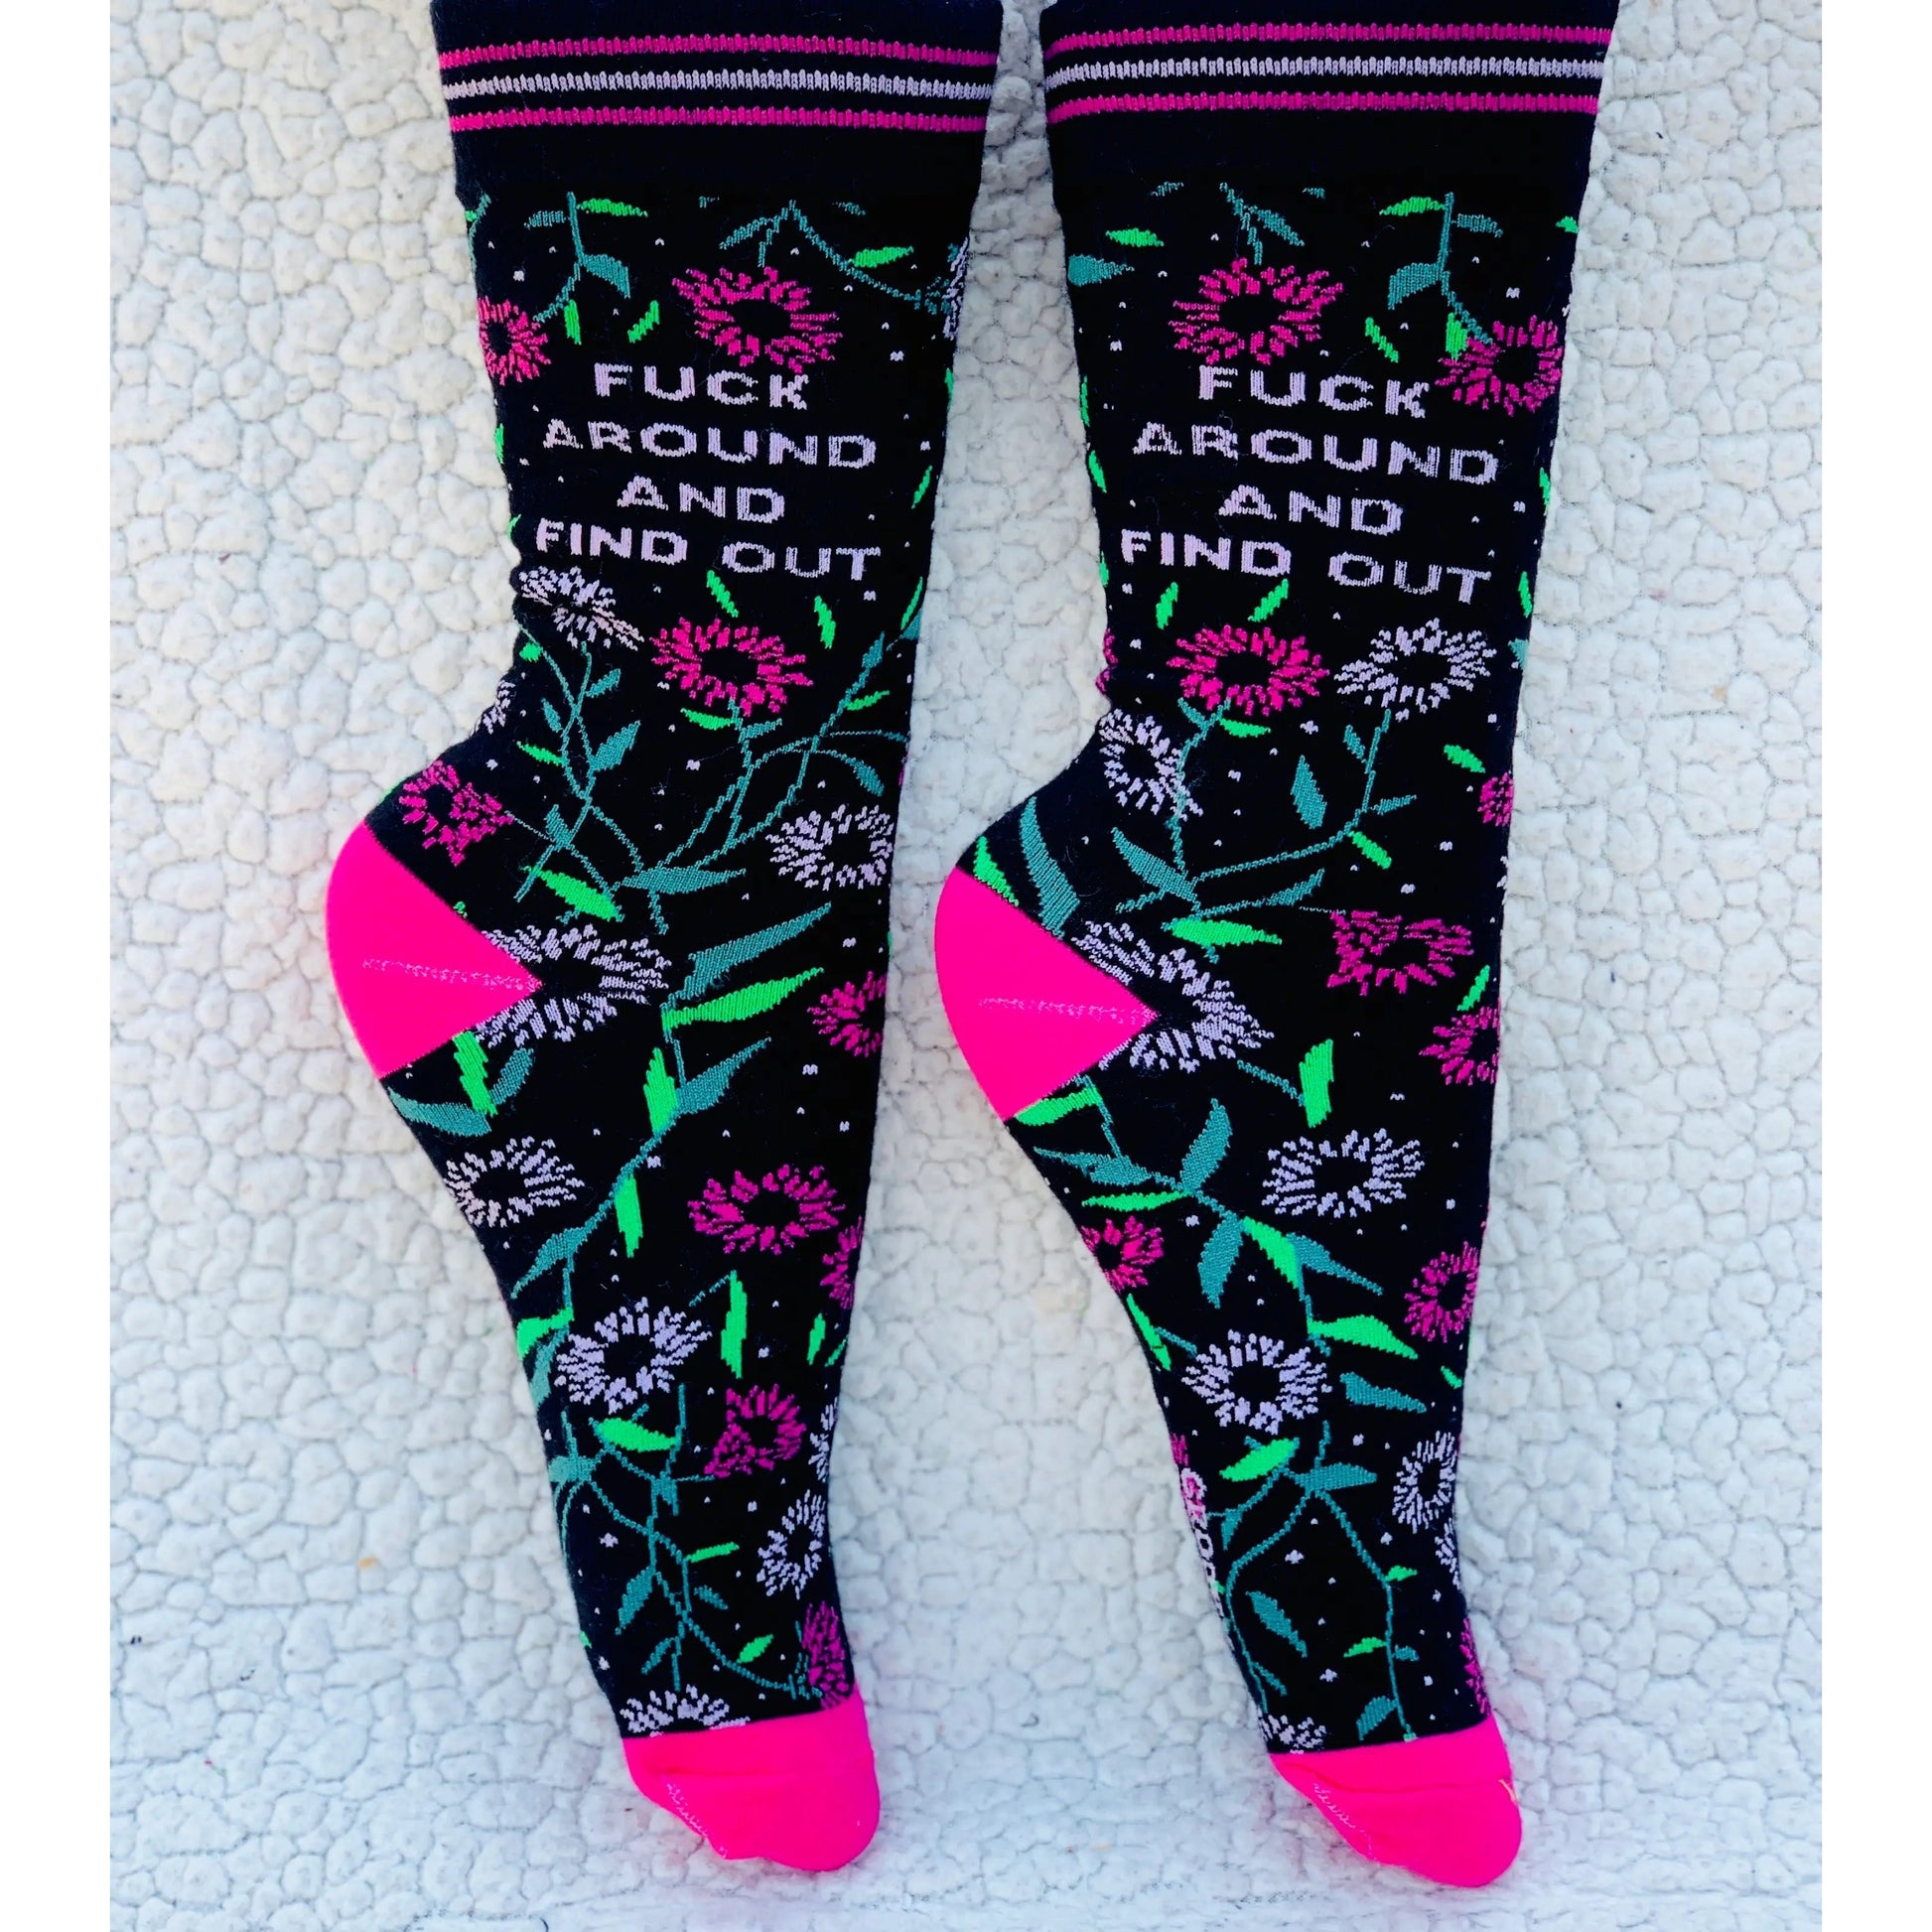 Fuck Around and Find Out Crew Socks